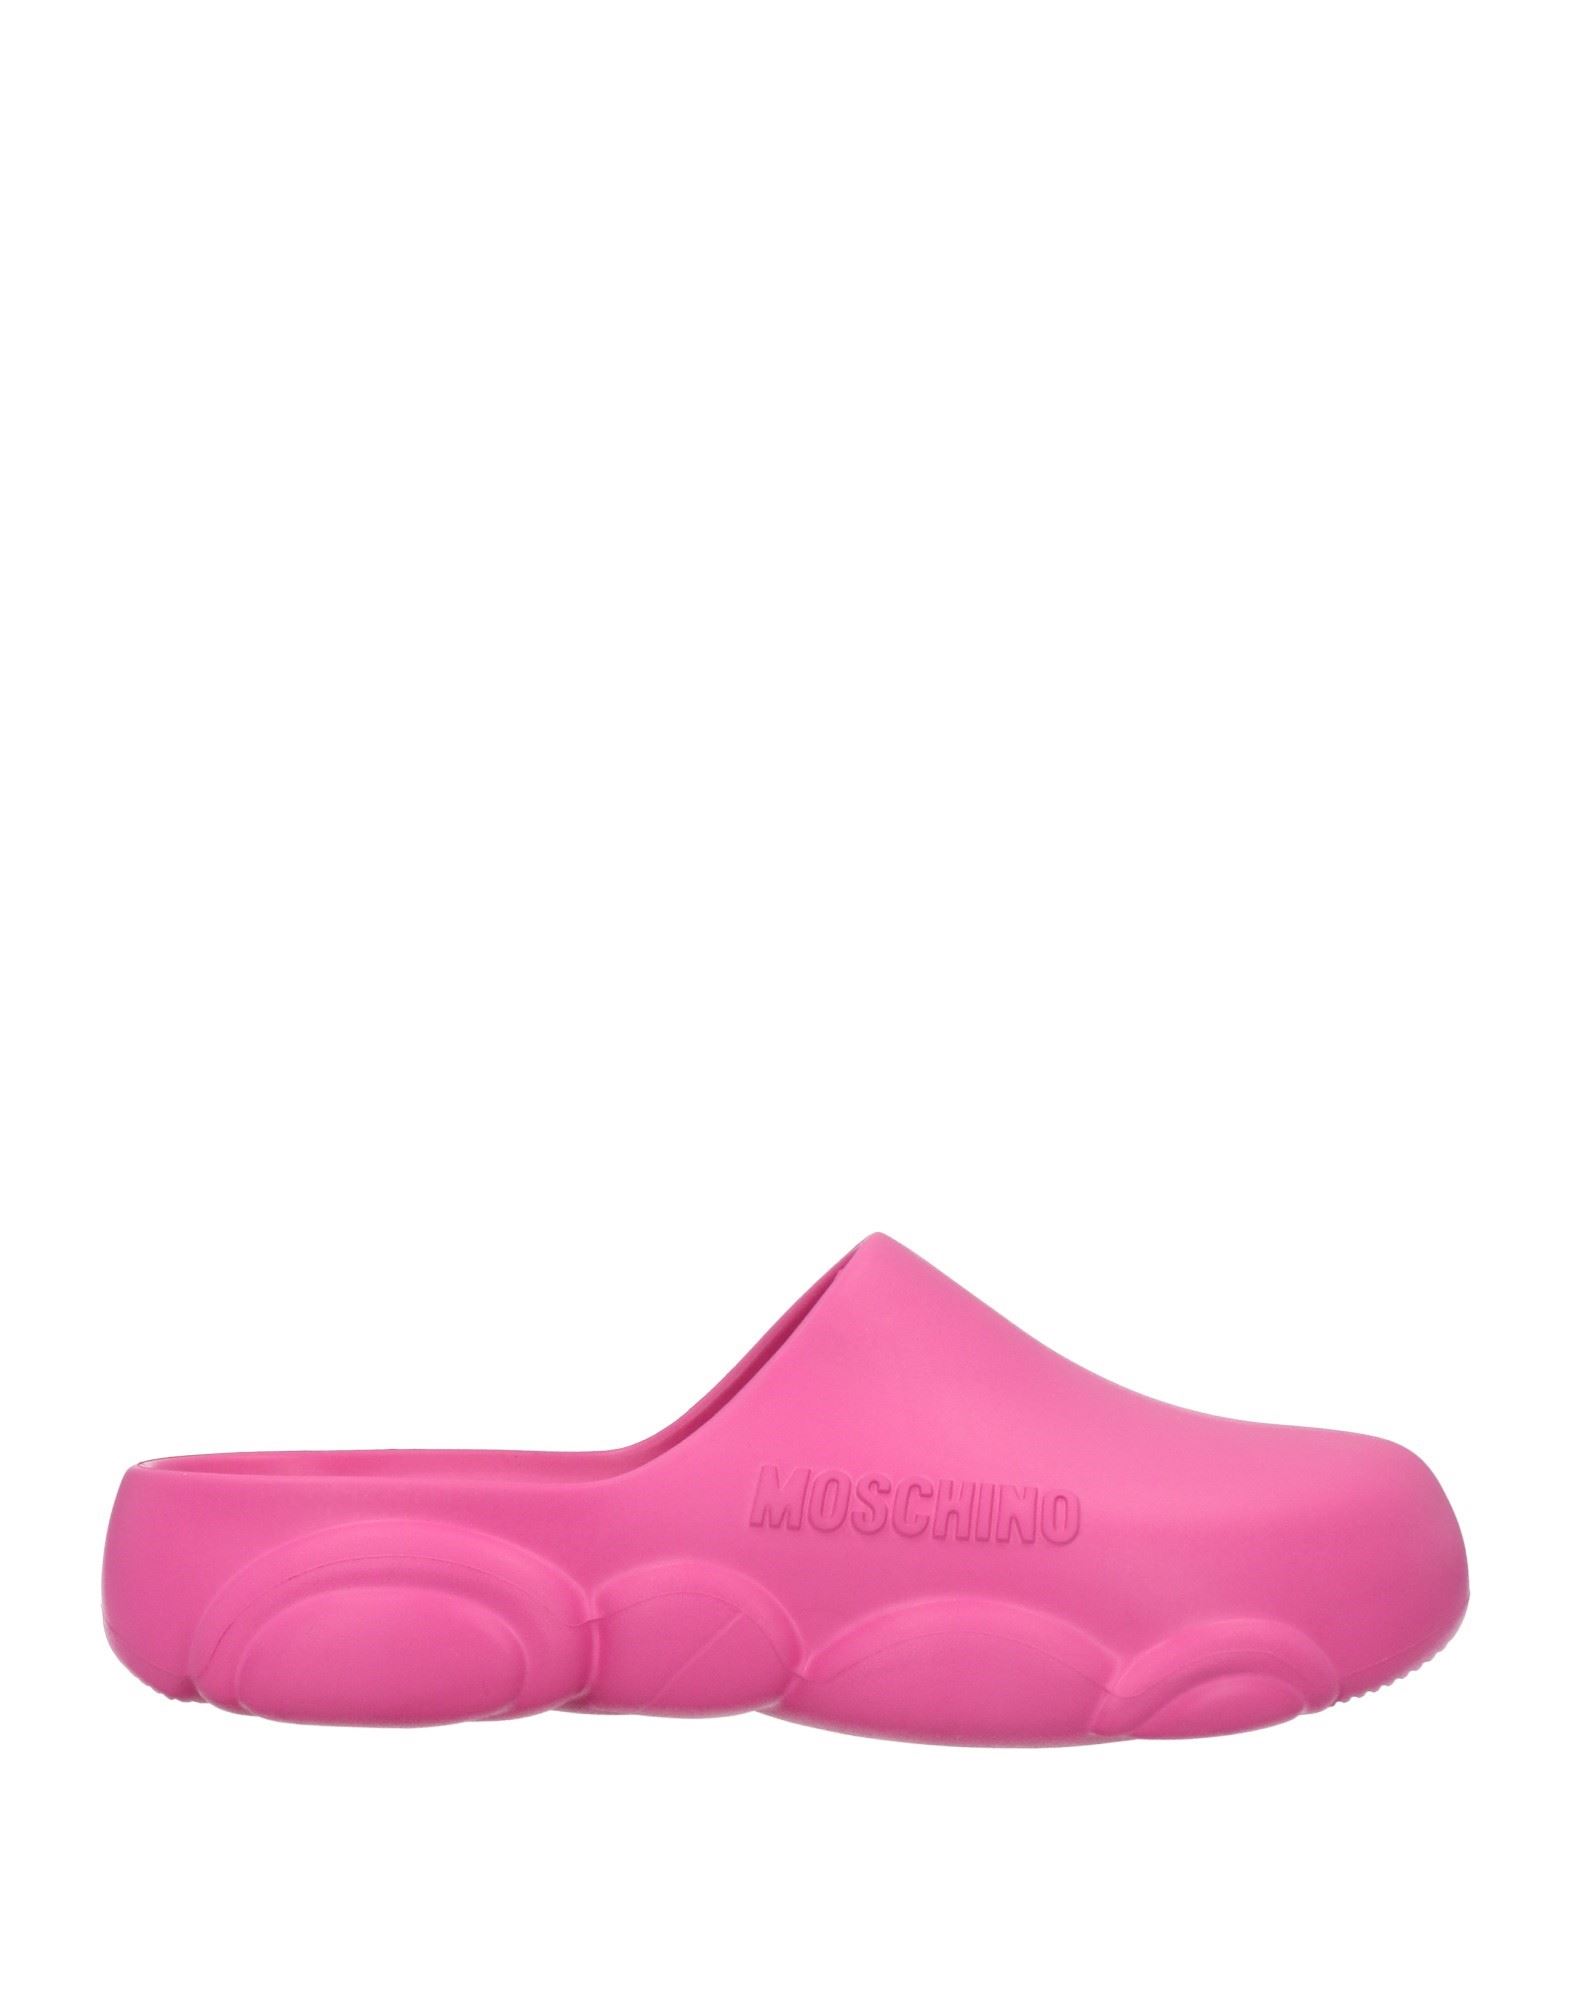 Moschino Woman Mules & Clogs Fuchsia Size 5 Rubber In Pink